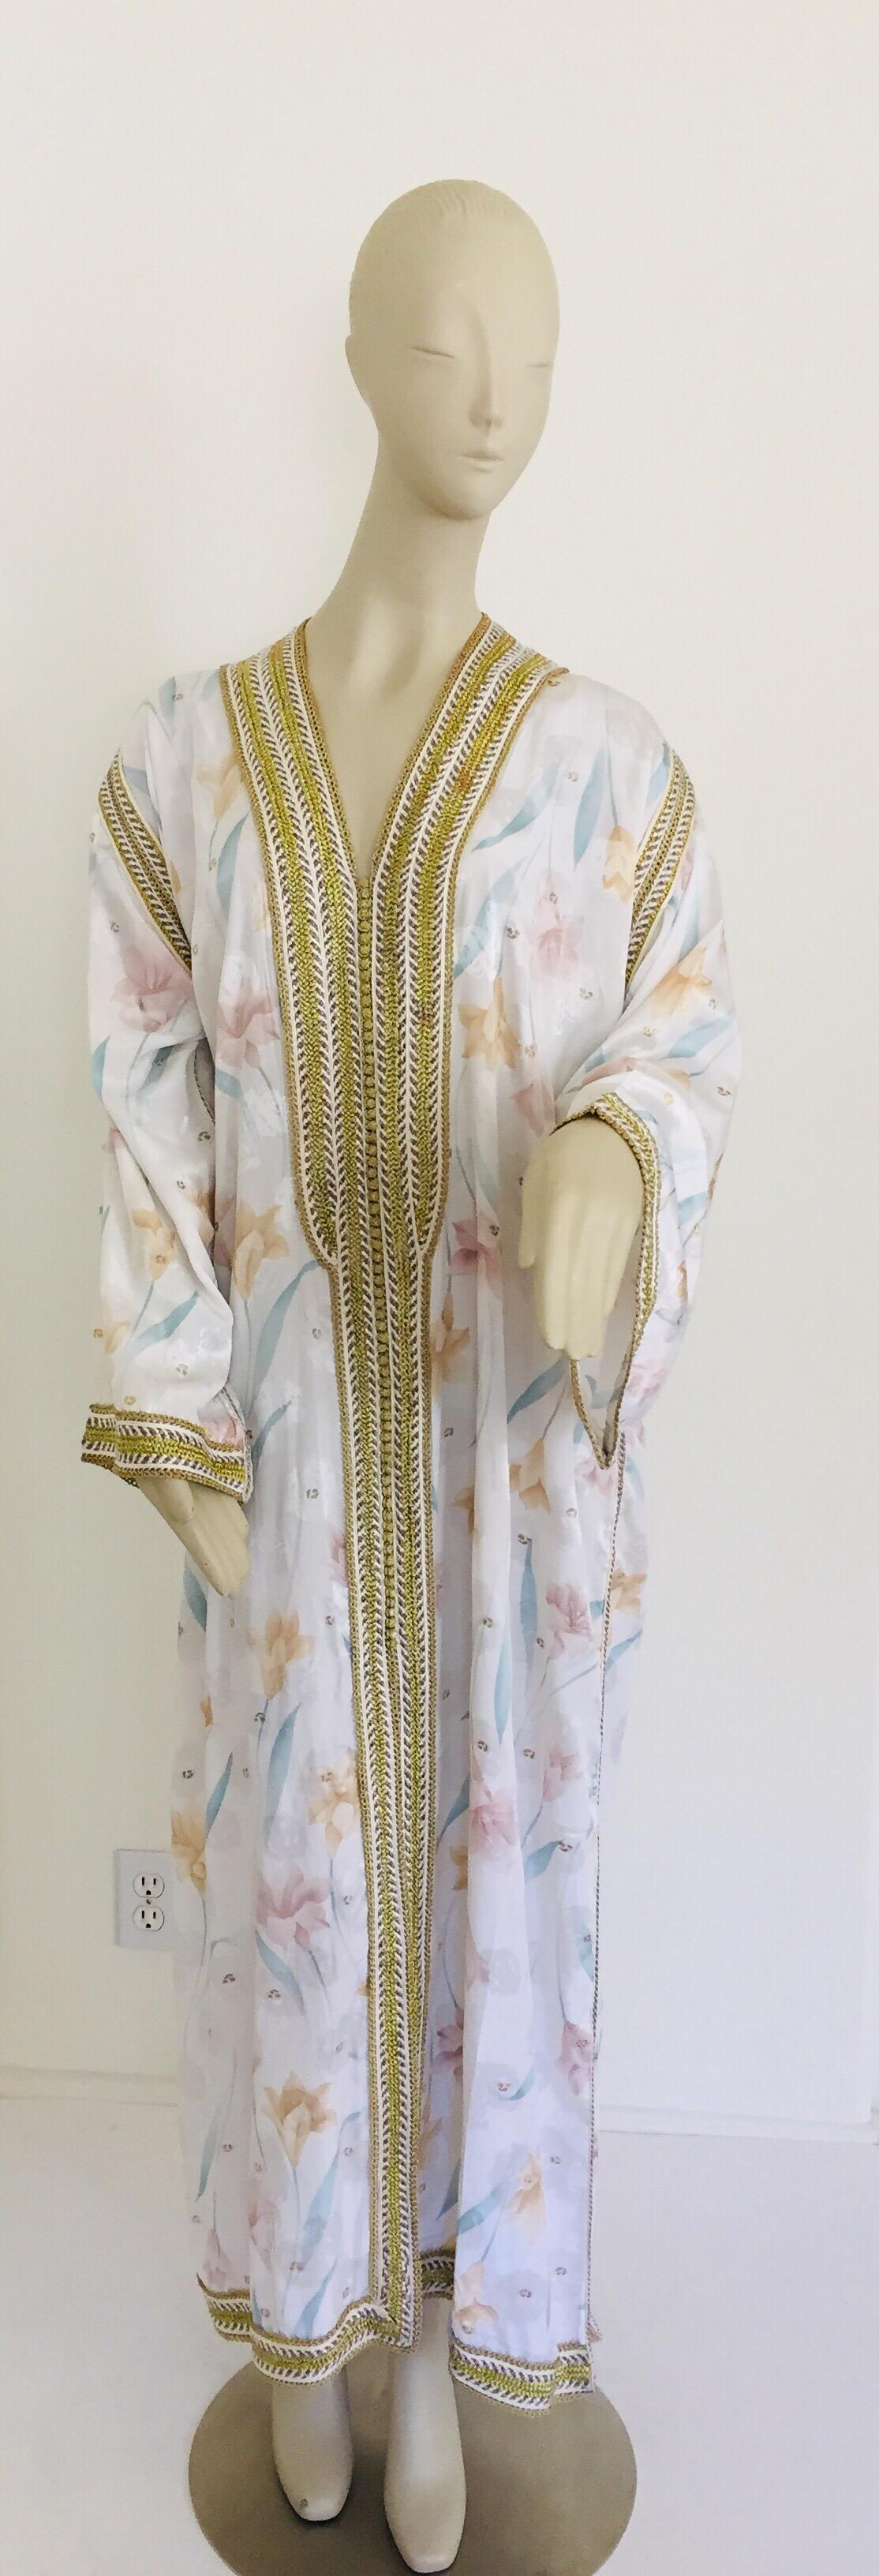 Elegant Moroccan caftan white floral embroidered with gold trim,
circa 1970s.
This long maxi dress kaftan trim is embroidered and embellished entirely by hand.
One of a kind evening Moroccan Middle Eastern gown.
The kaftan features a traditional